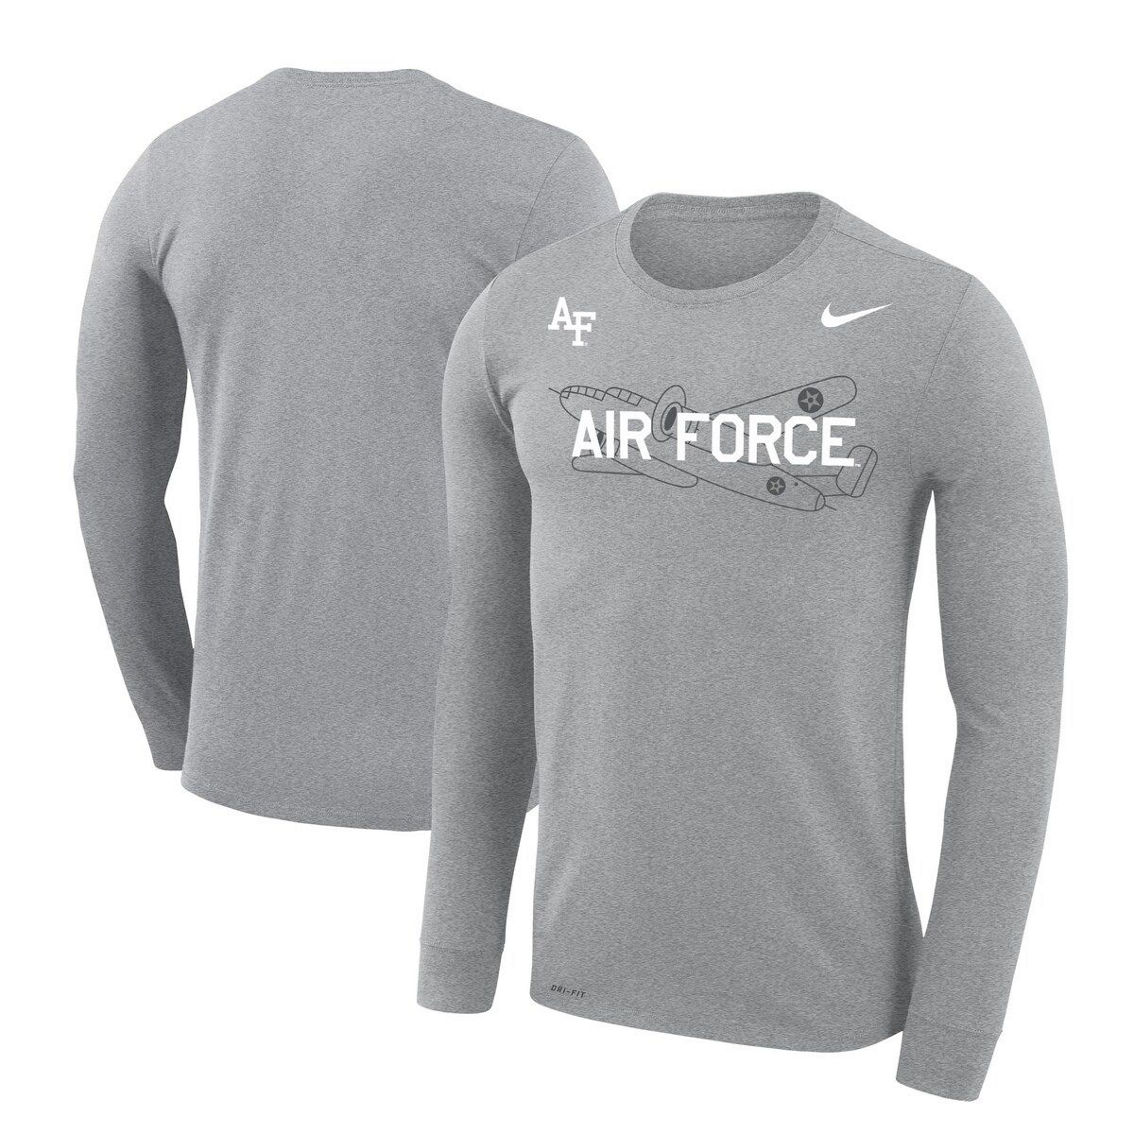 Nike Men's Heather Gray Air Force Falcons Rivalry Plane Legend Performance T-Shirt - Image 2 of 4